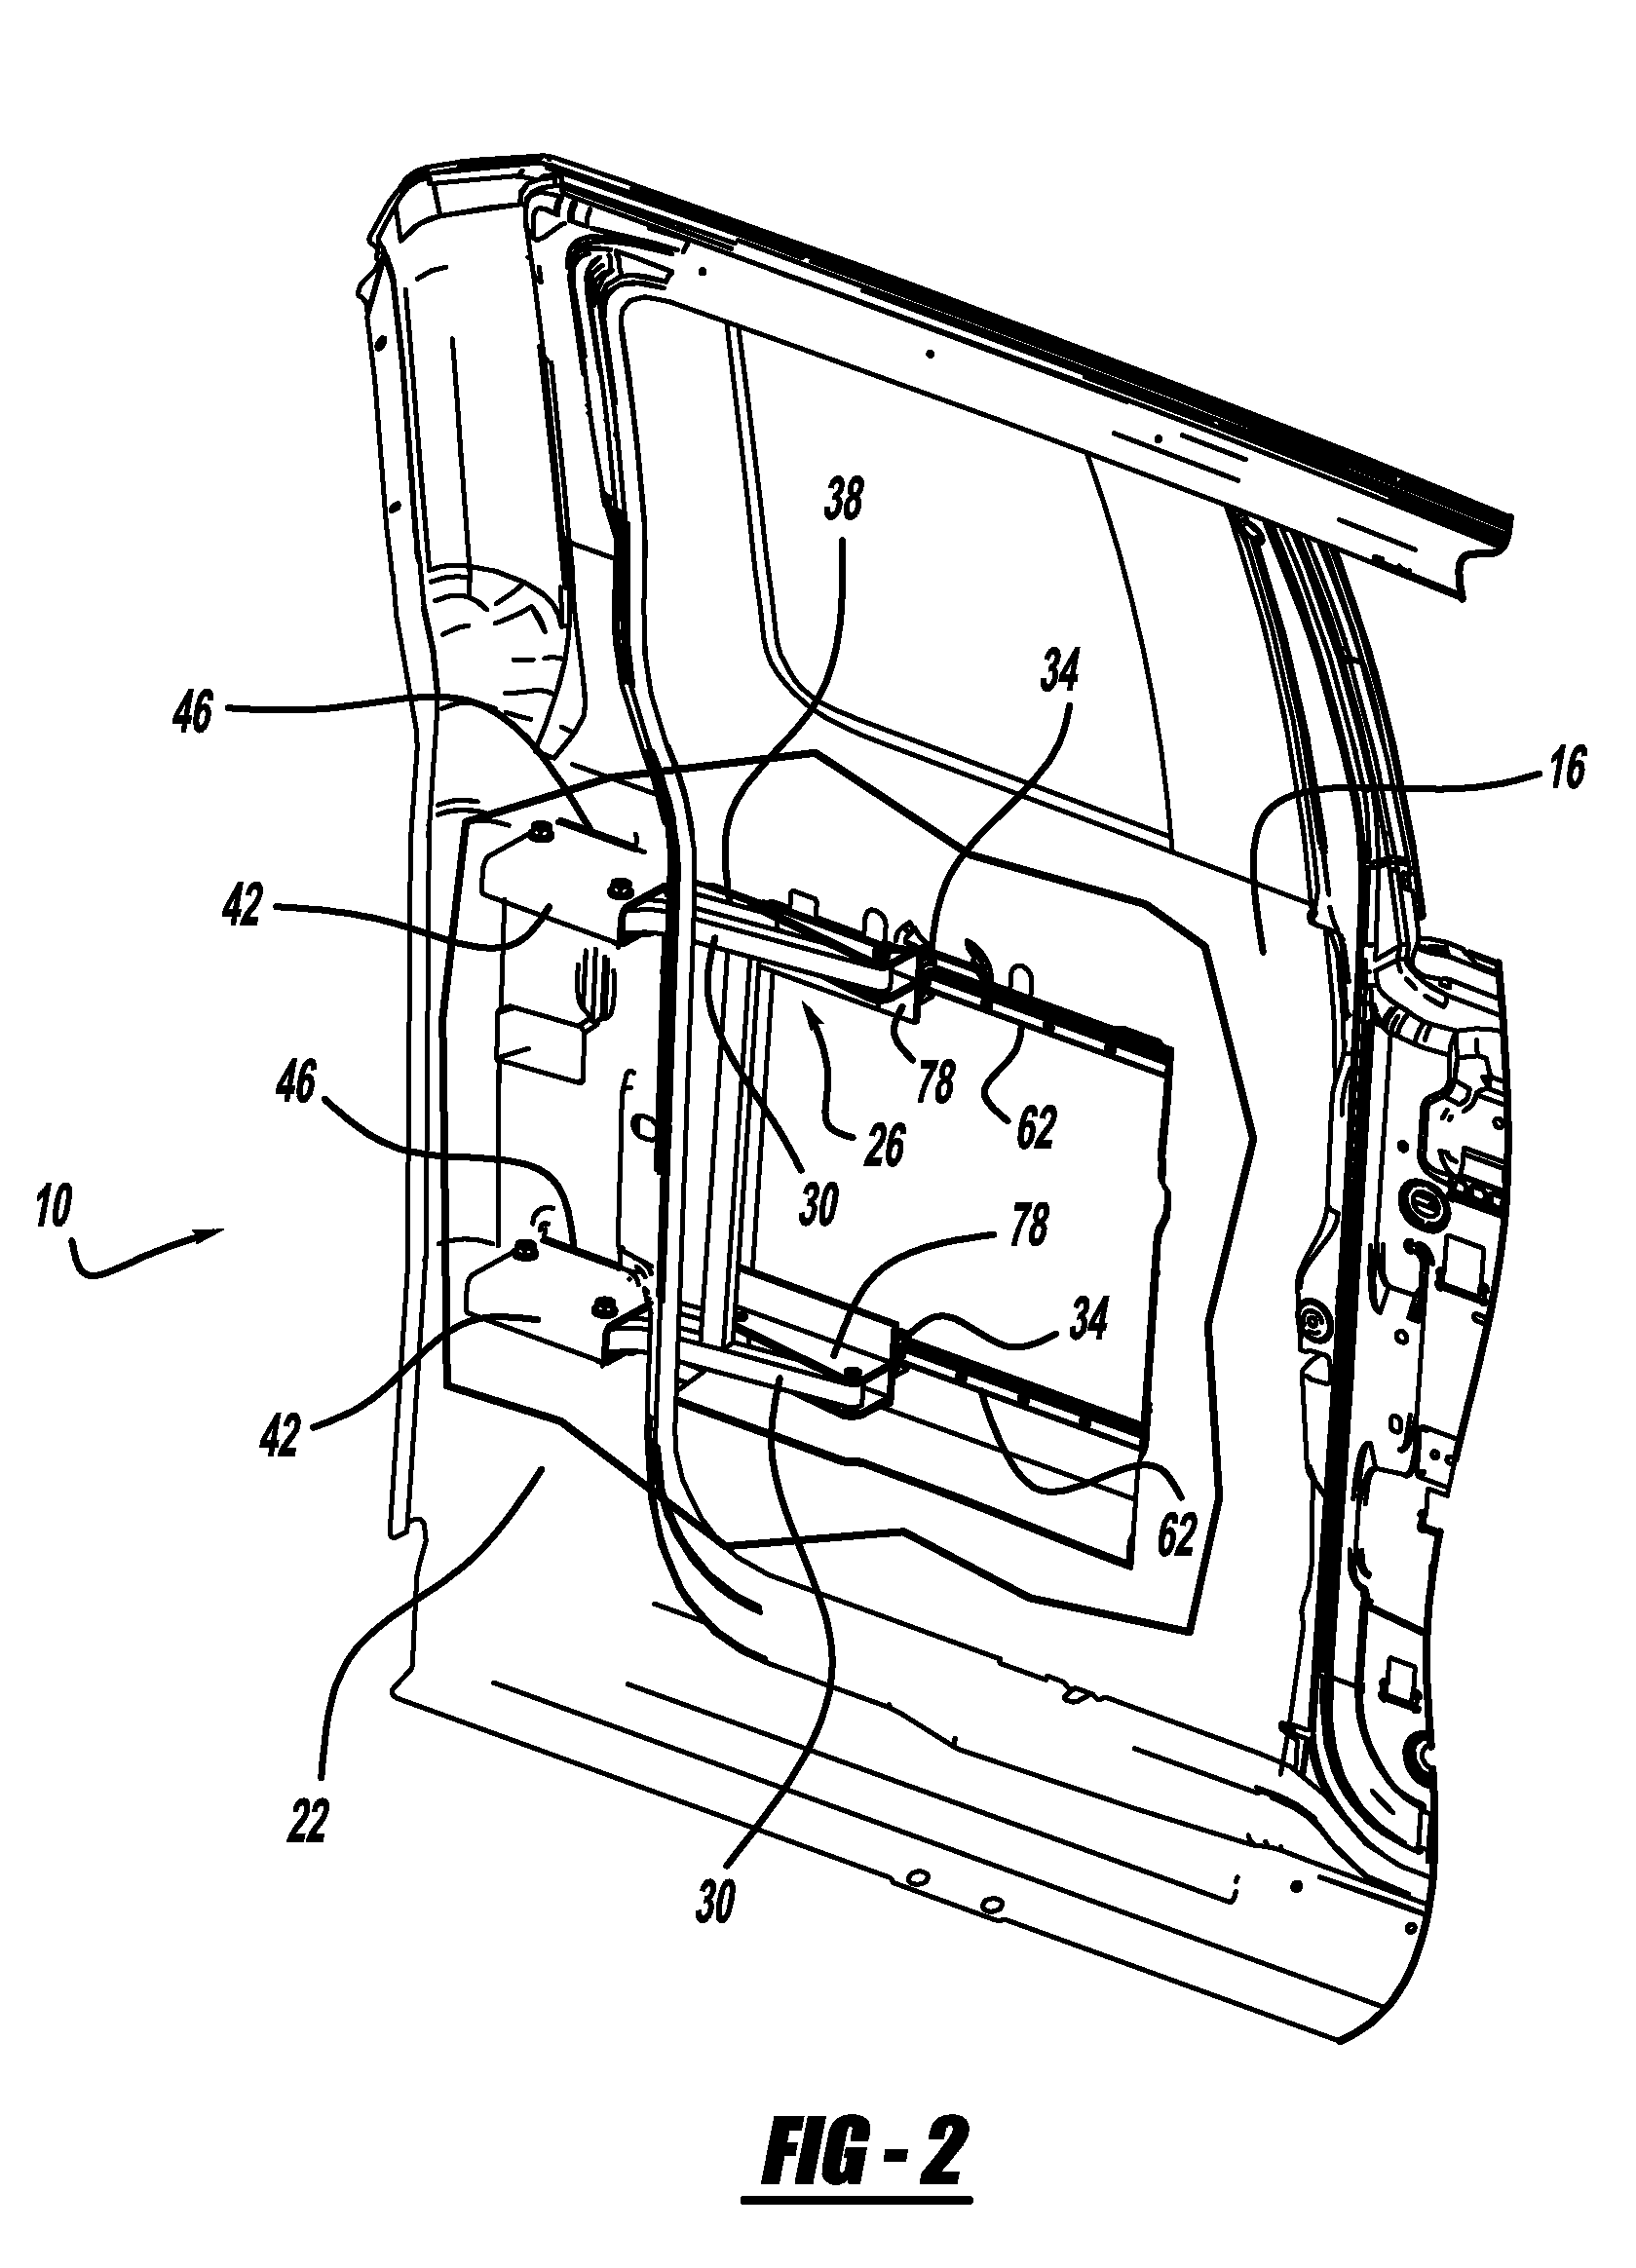 Vehicle unguided four-bar rear door articulating and sliding mechanism